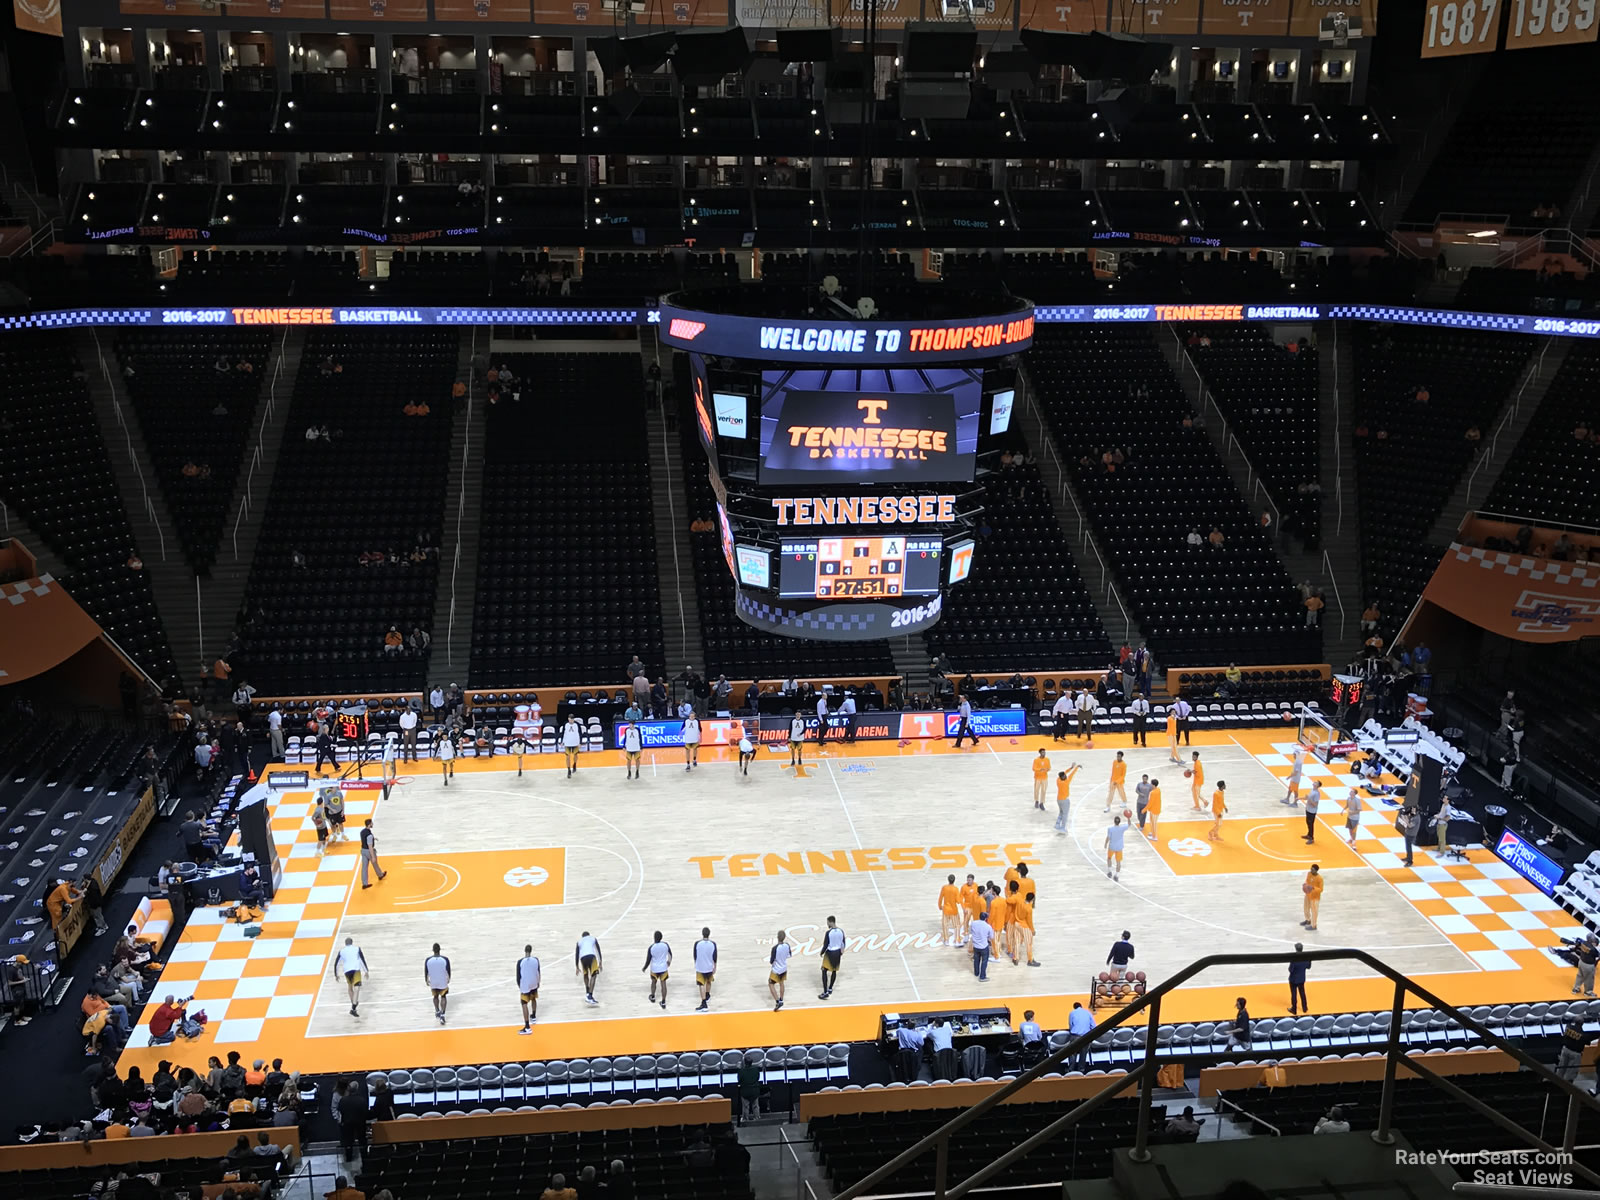 Section 322 at ThompsonBoling Arena